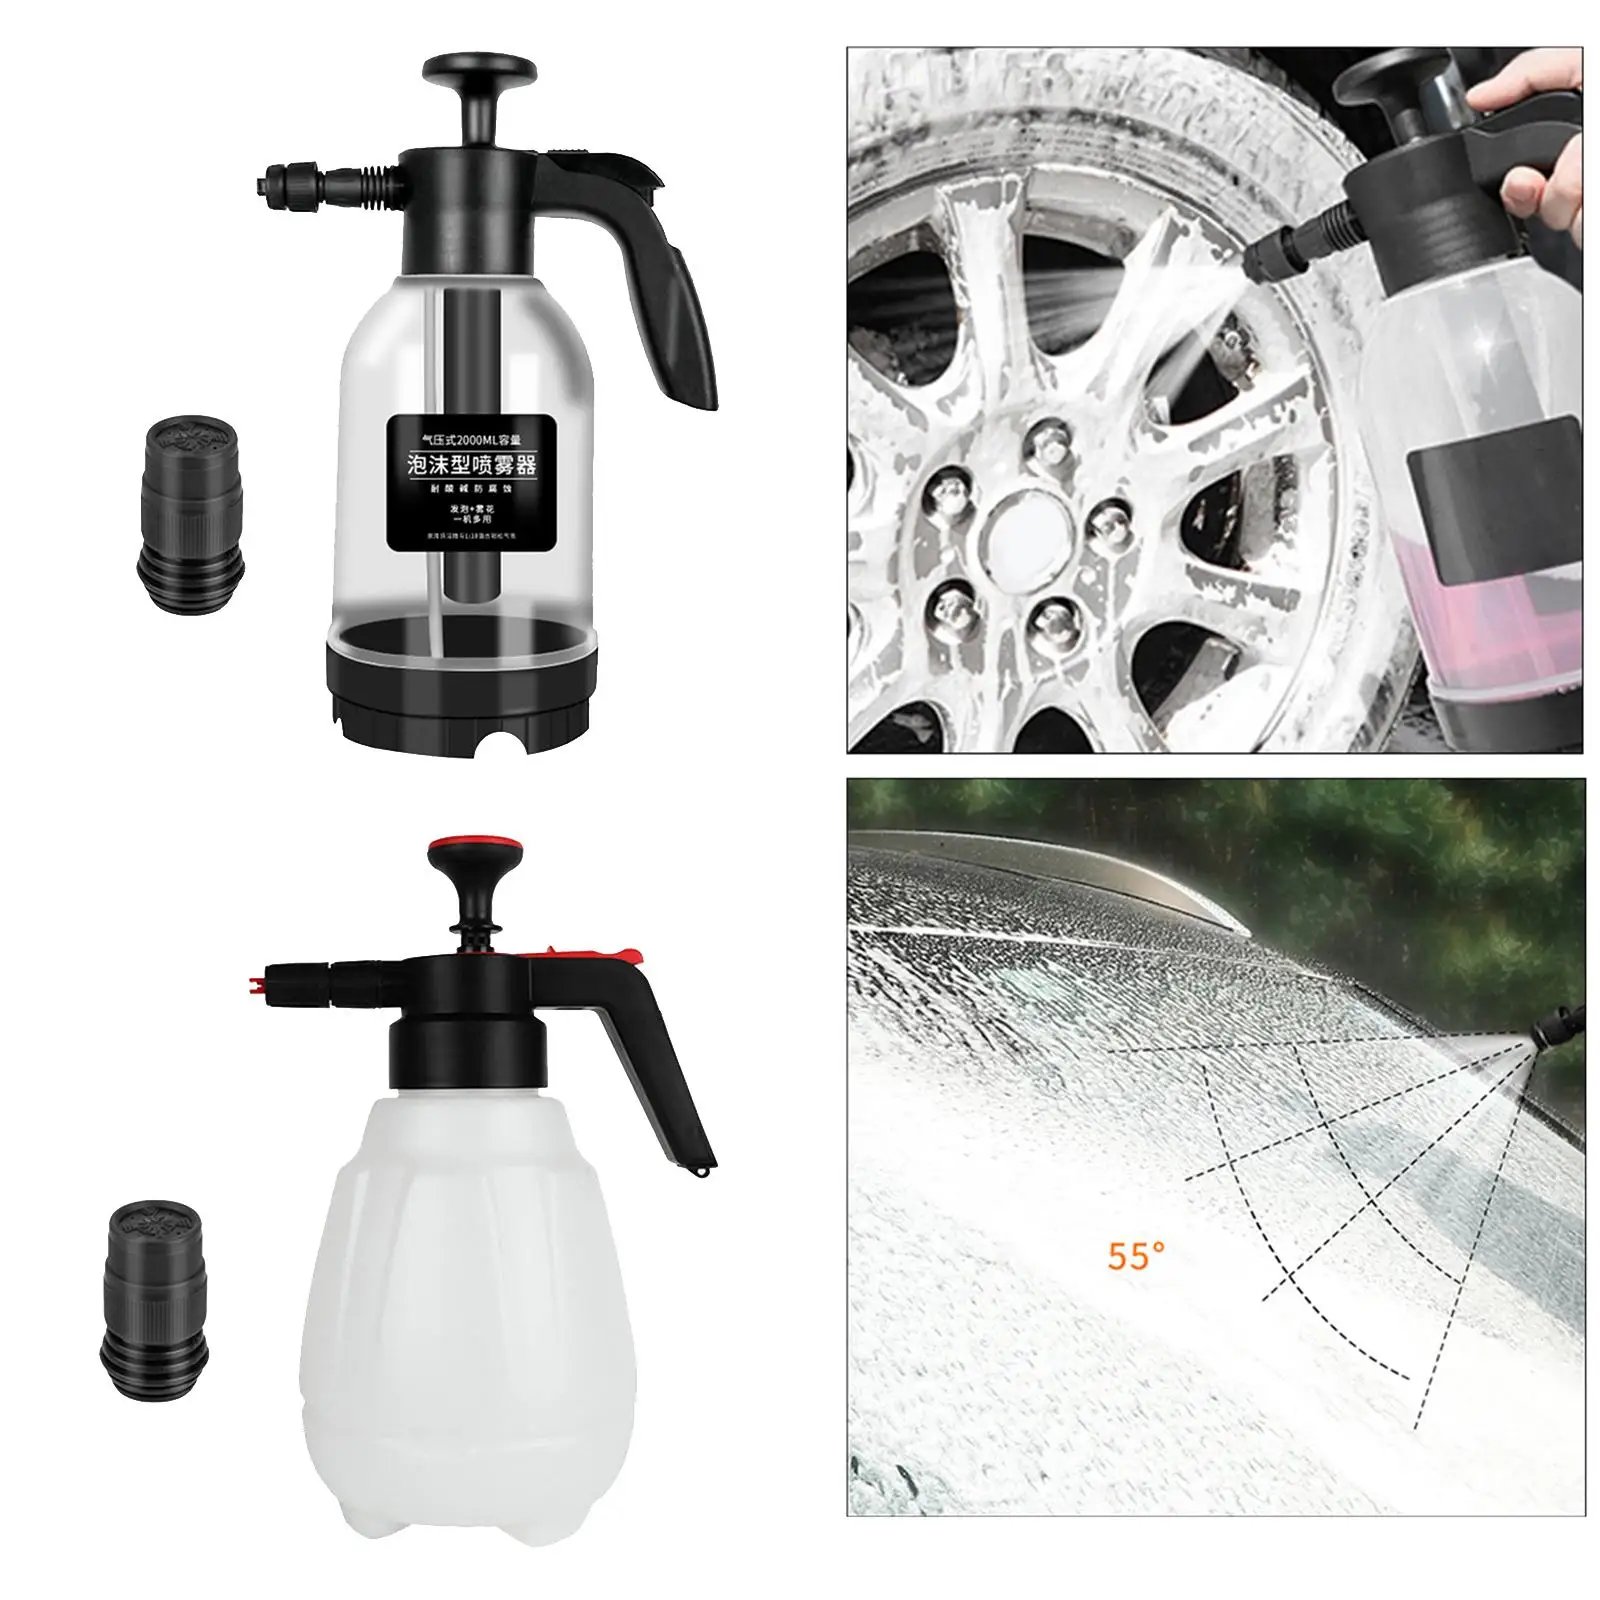 2L/2.5L Car Wash Sprayer Auto Cleaning Accessories for Household Garden Lawn